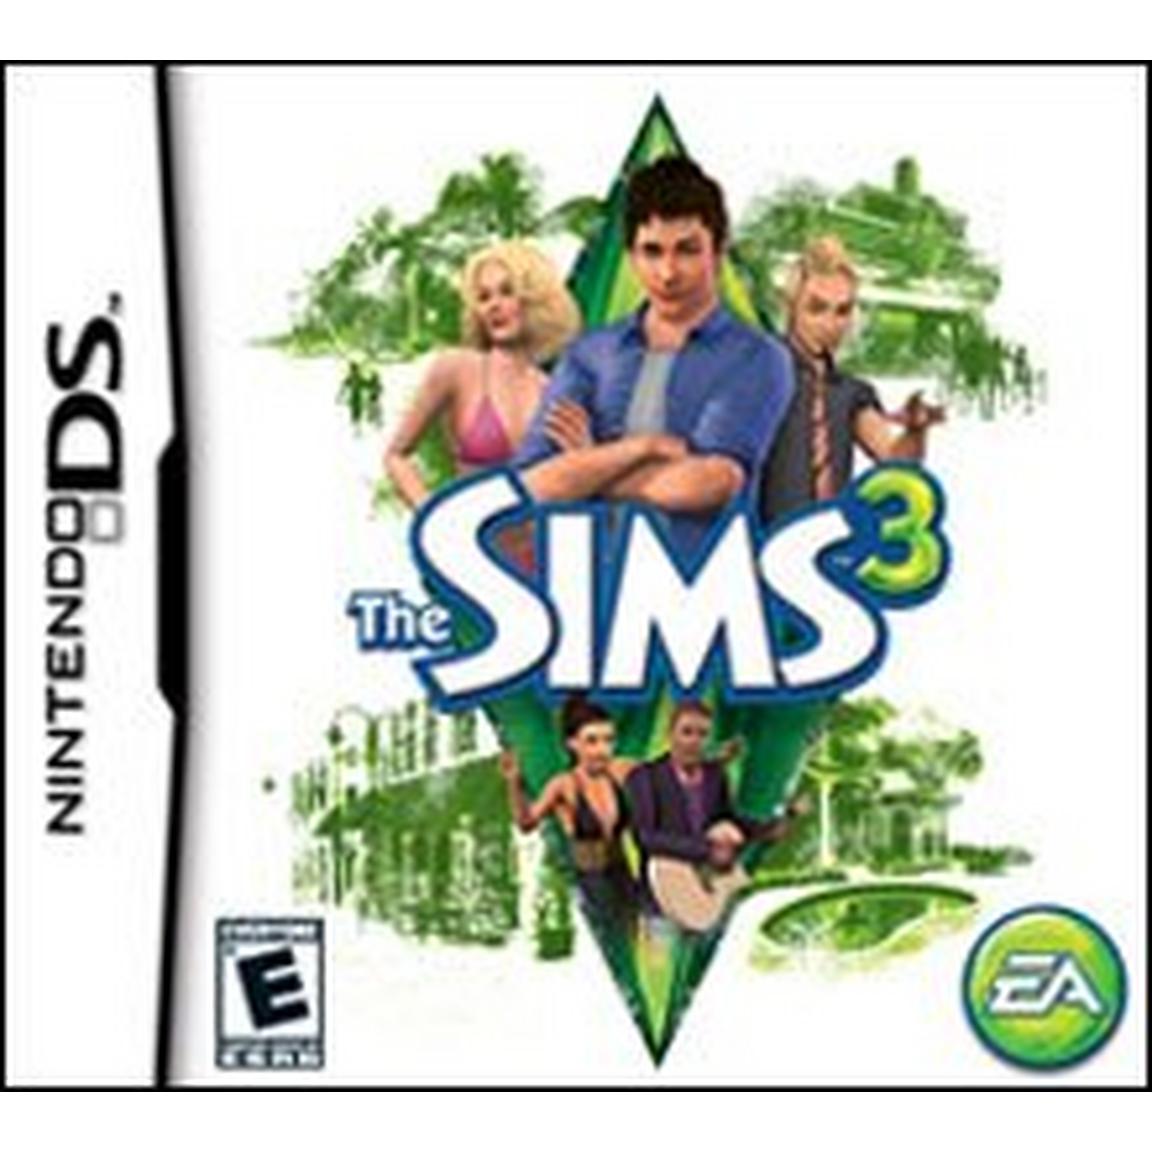 The Sims 3 - Nintendo DS, Pre-Owned